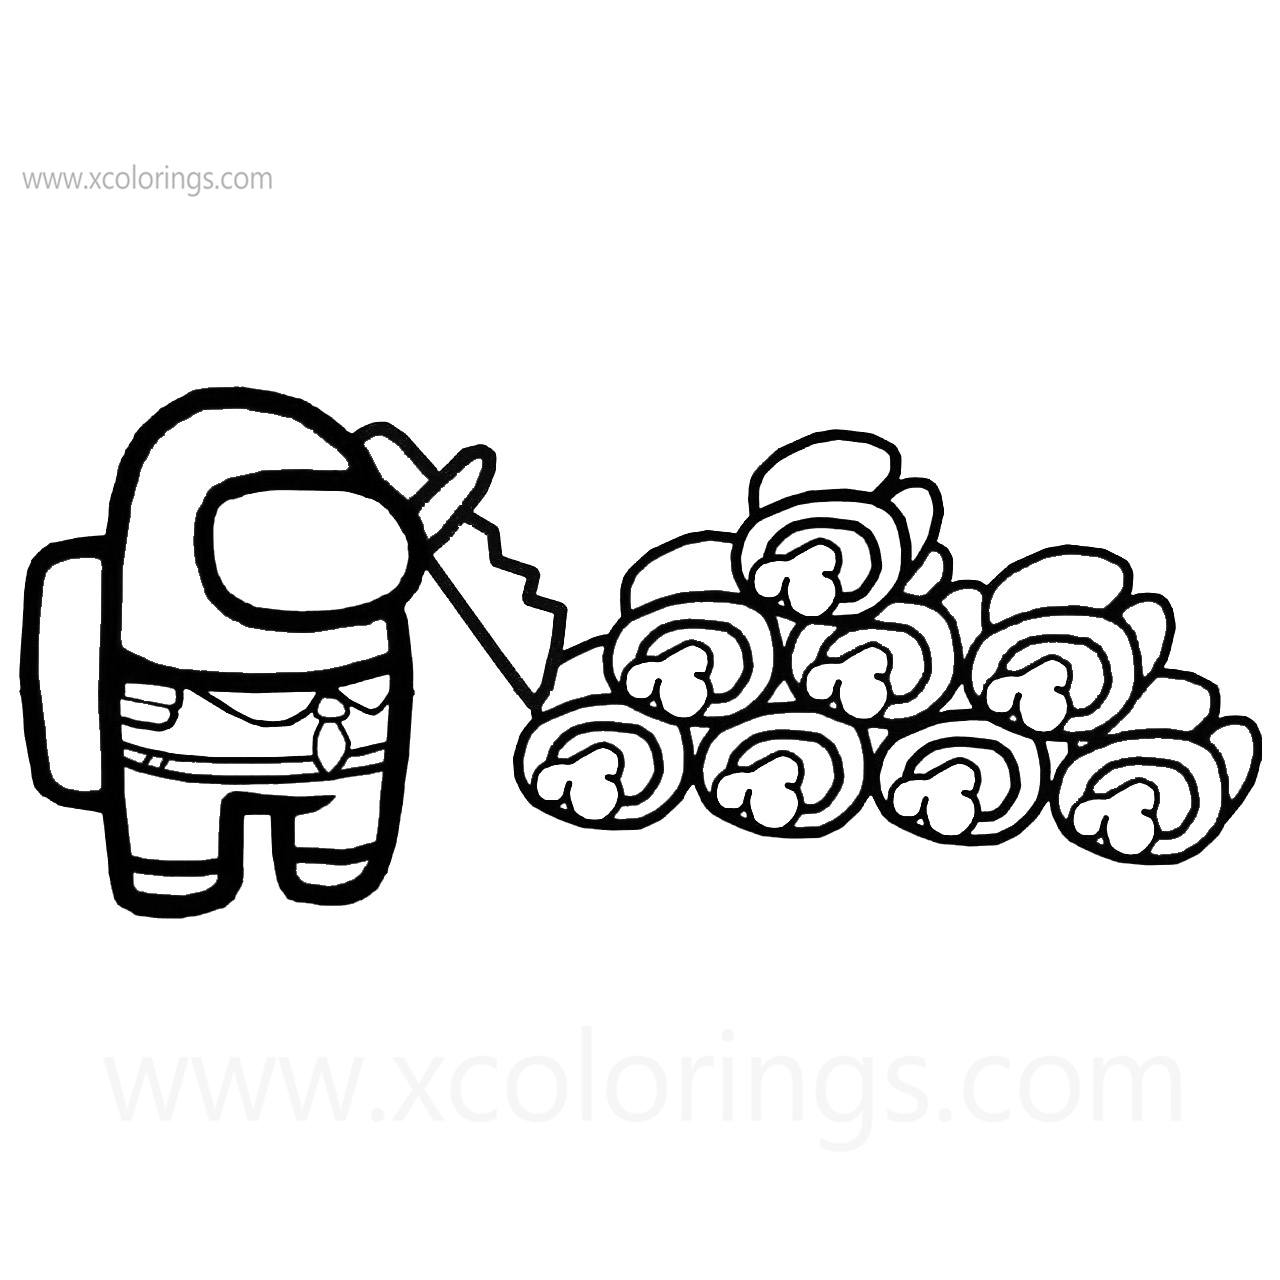 Free Among Us Coloring Pages Impostor with Bodies printable